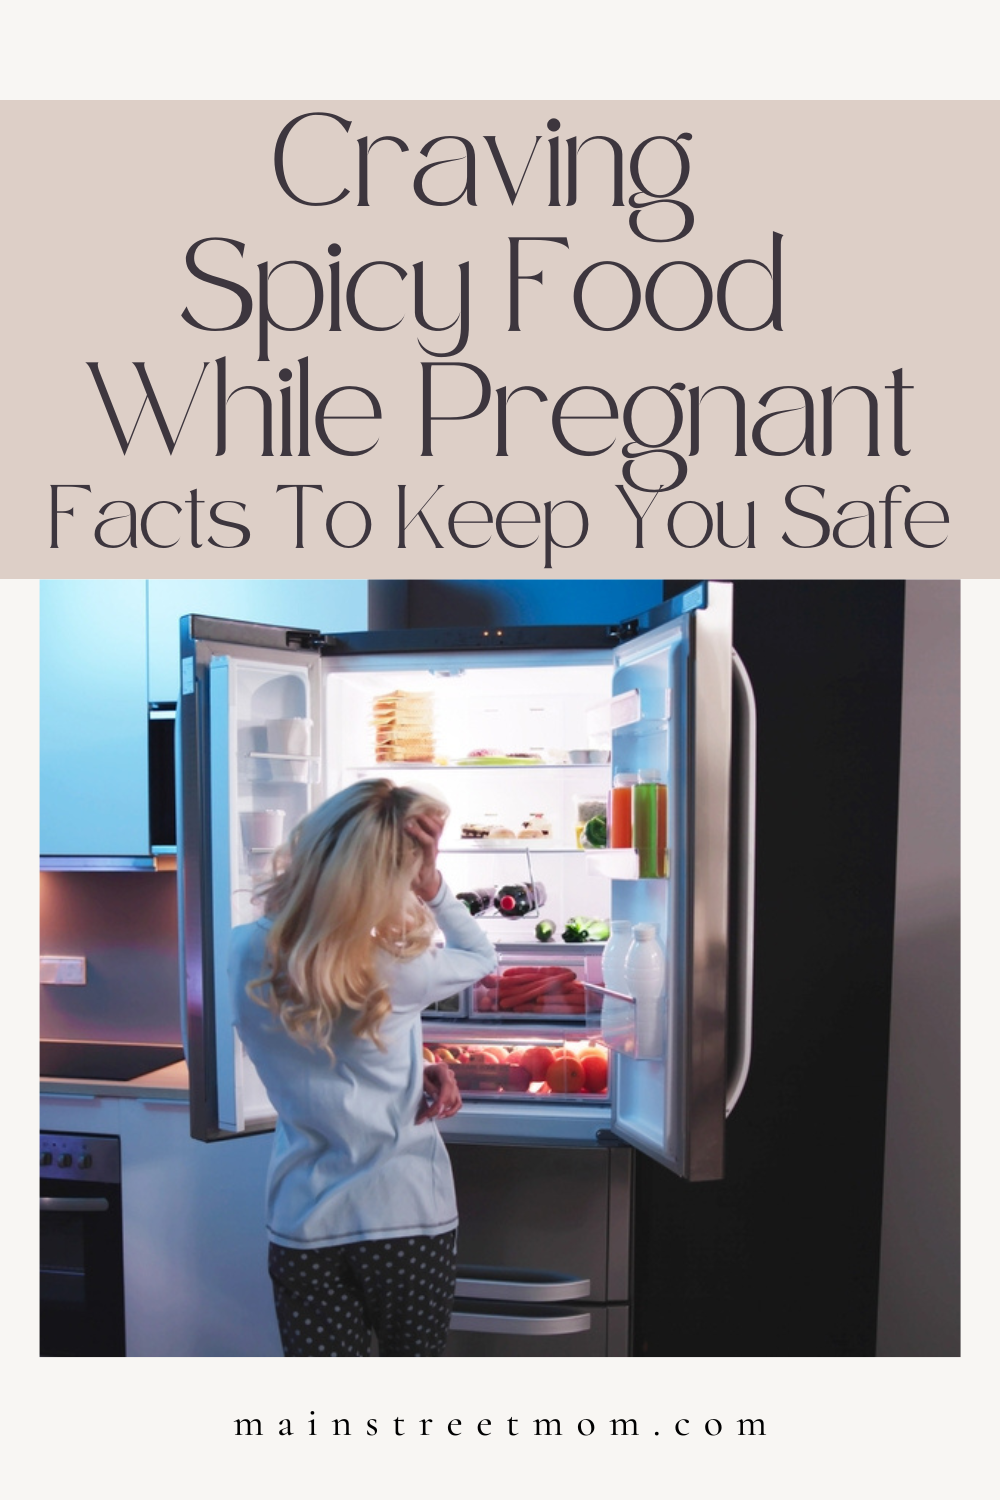 Craving Spicy Food While Pregnant: Facts To Keep You Safe